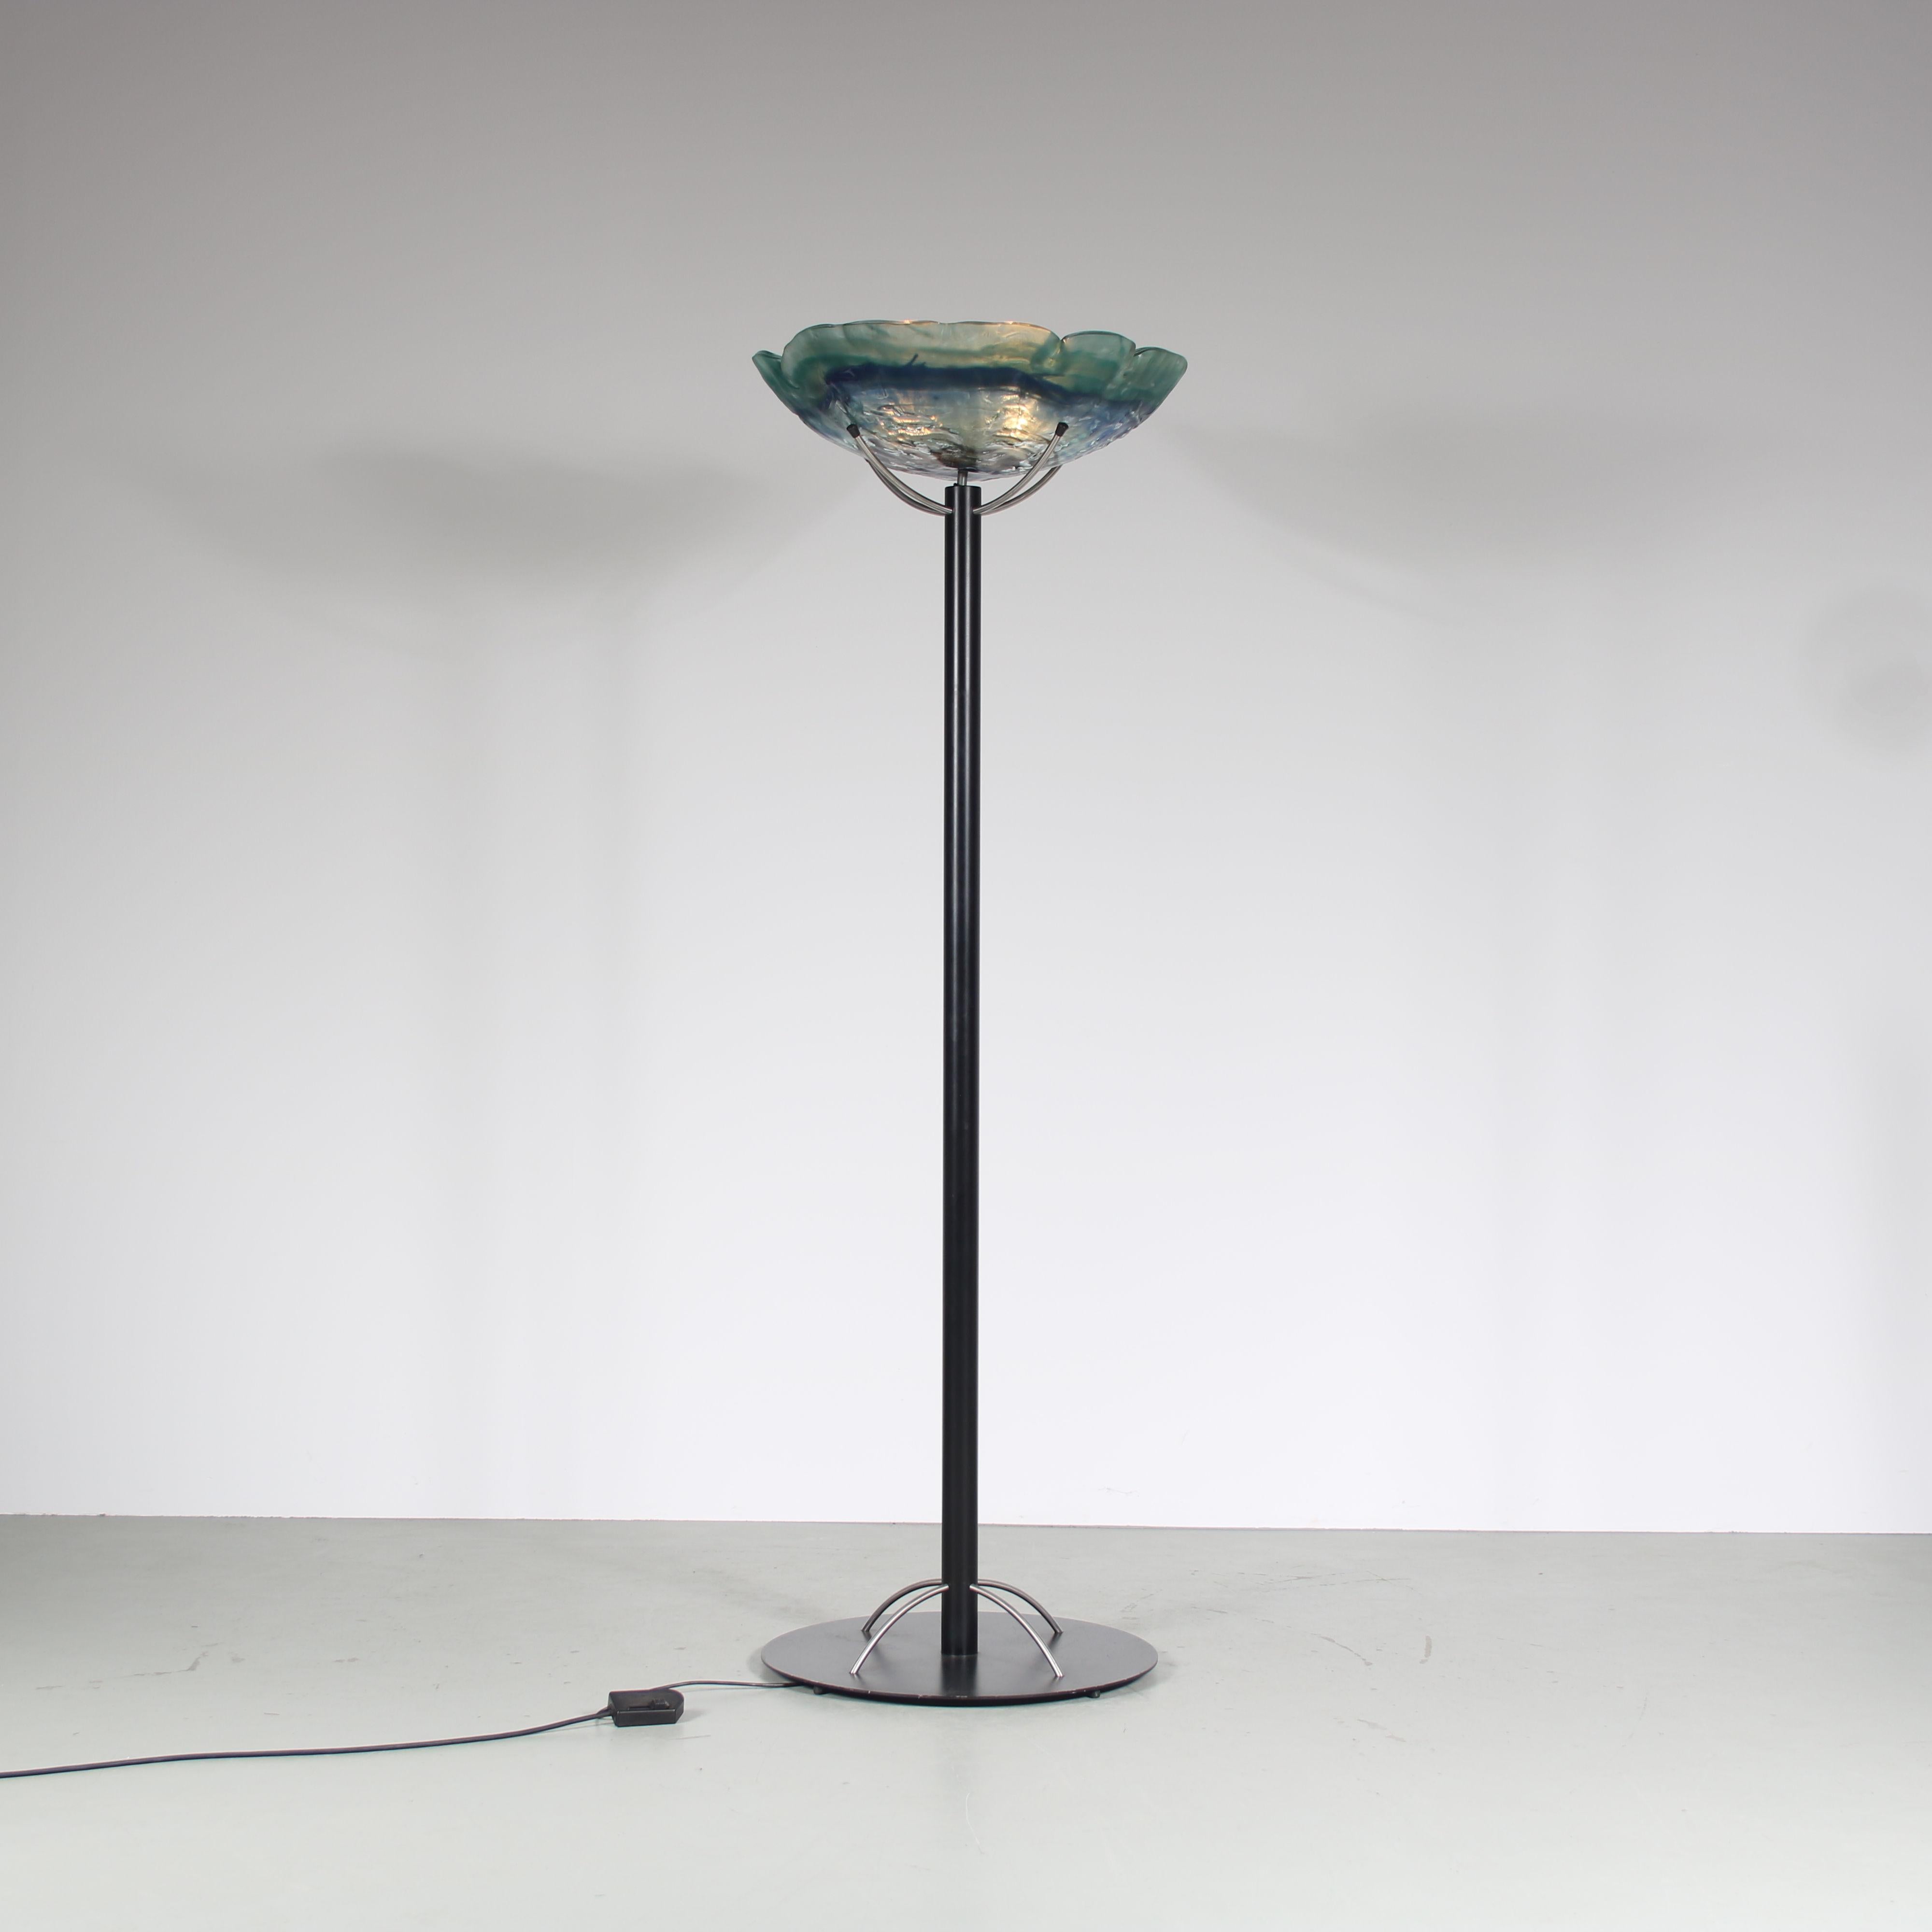 An exquisite piece from the 1980s, this XL black metal floor lamp is a true statement of elegance and artistry. Designed by Louis La Rooy and produced by Van Tetterode Amsterdam in the Netherlands, it showcases exceptional craftsmanship and